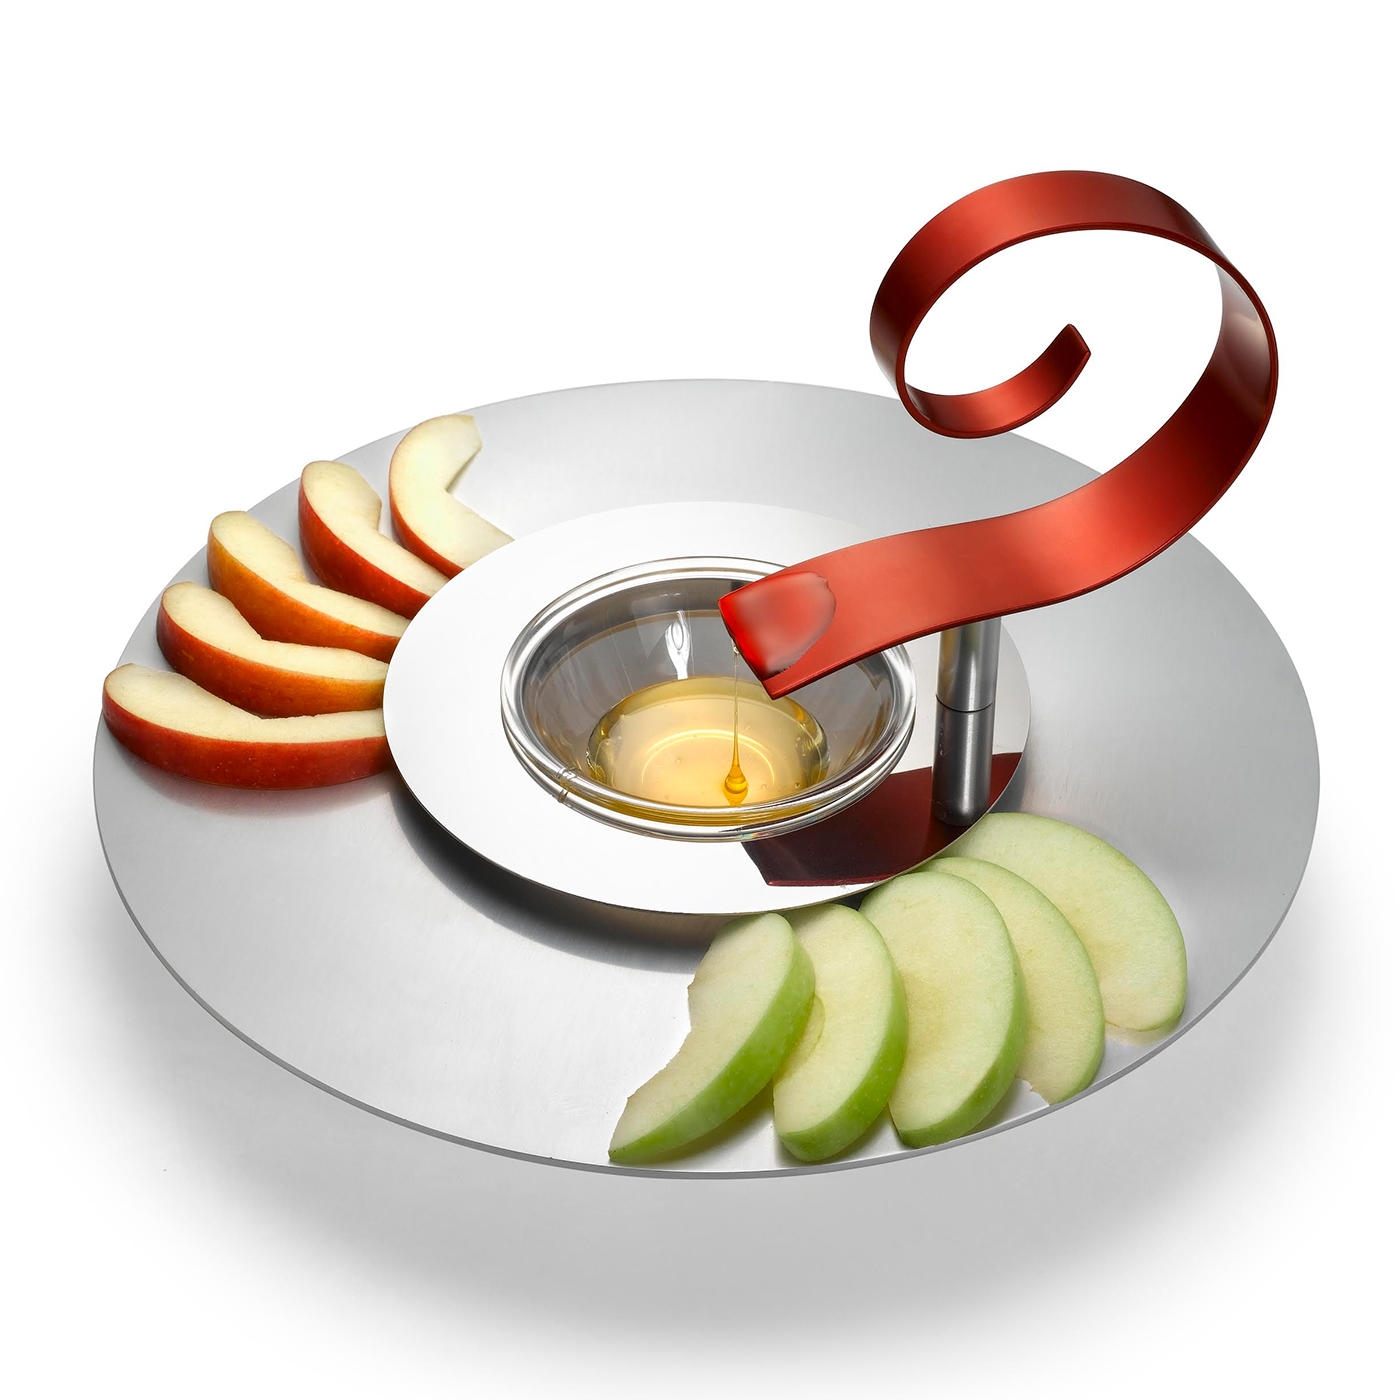 Laura Cowan Stainless Steel and Aluminum Spiral Apple and Honey Plate - Red - 3